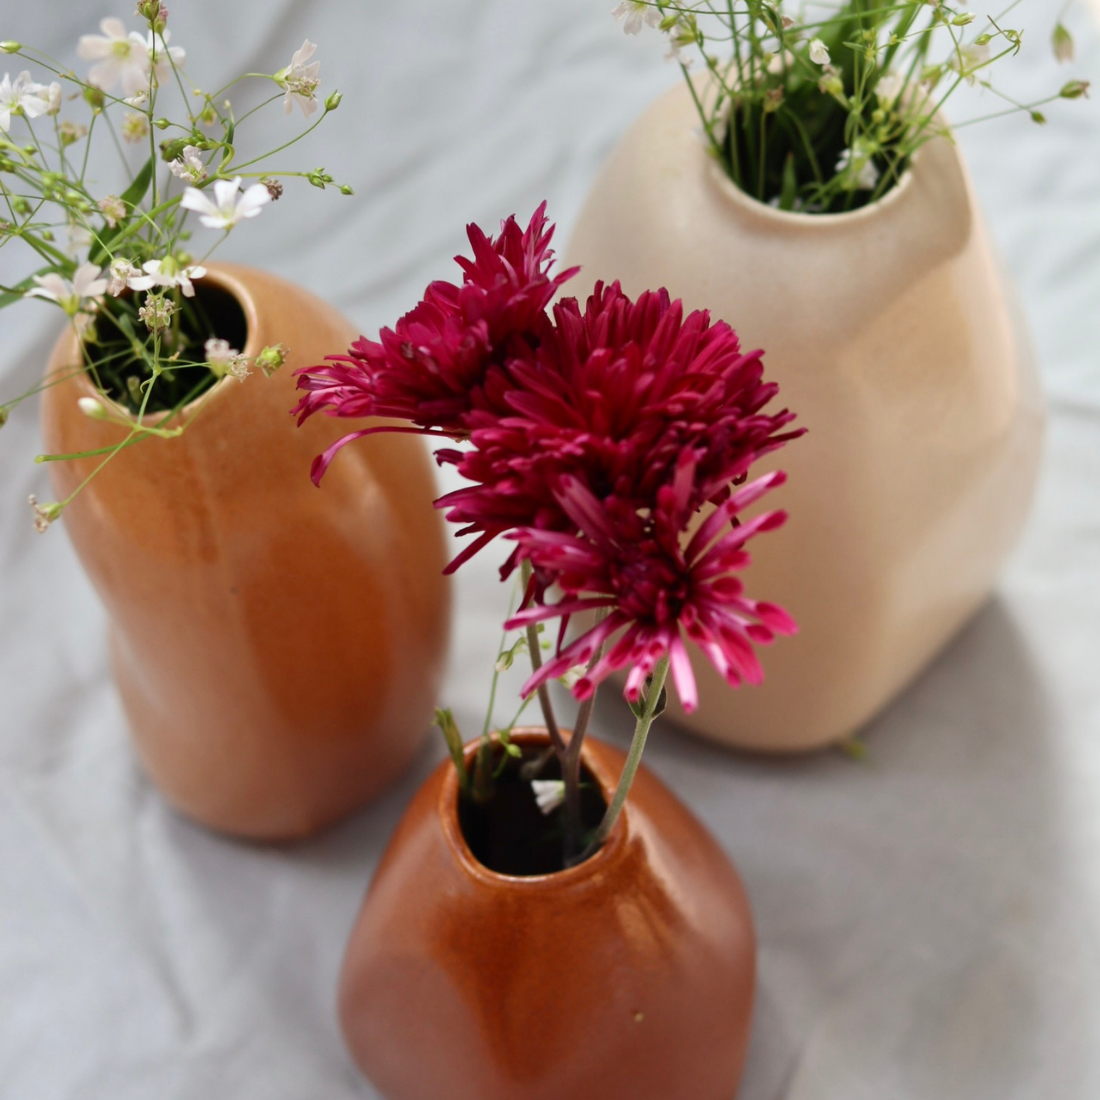 Ceramic flower pots with flowers